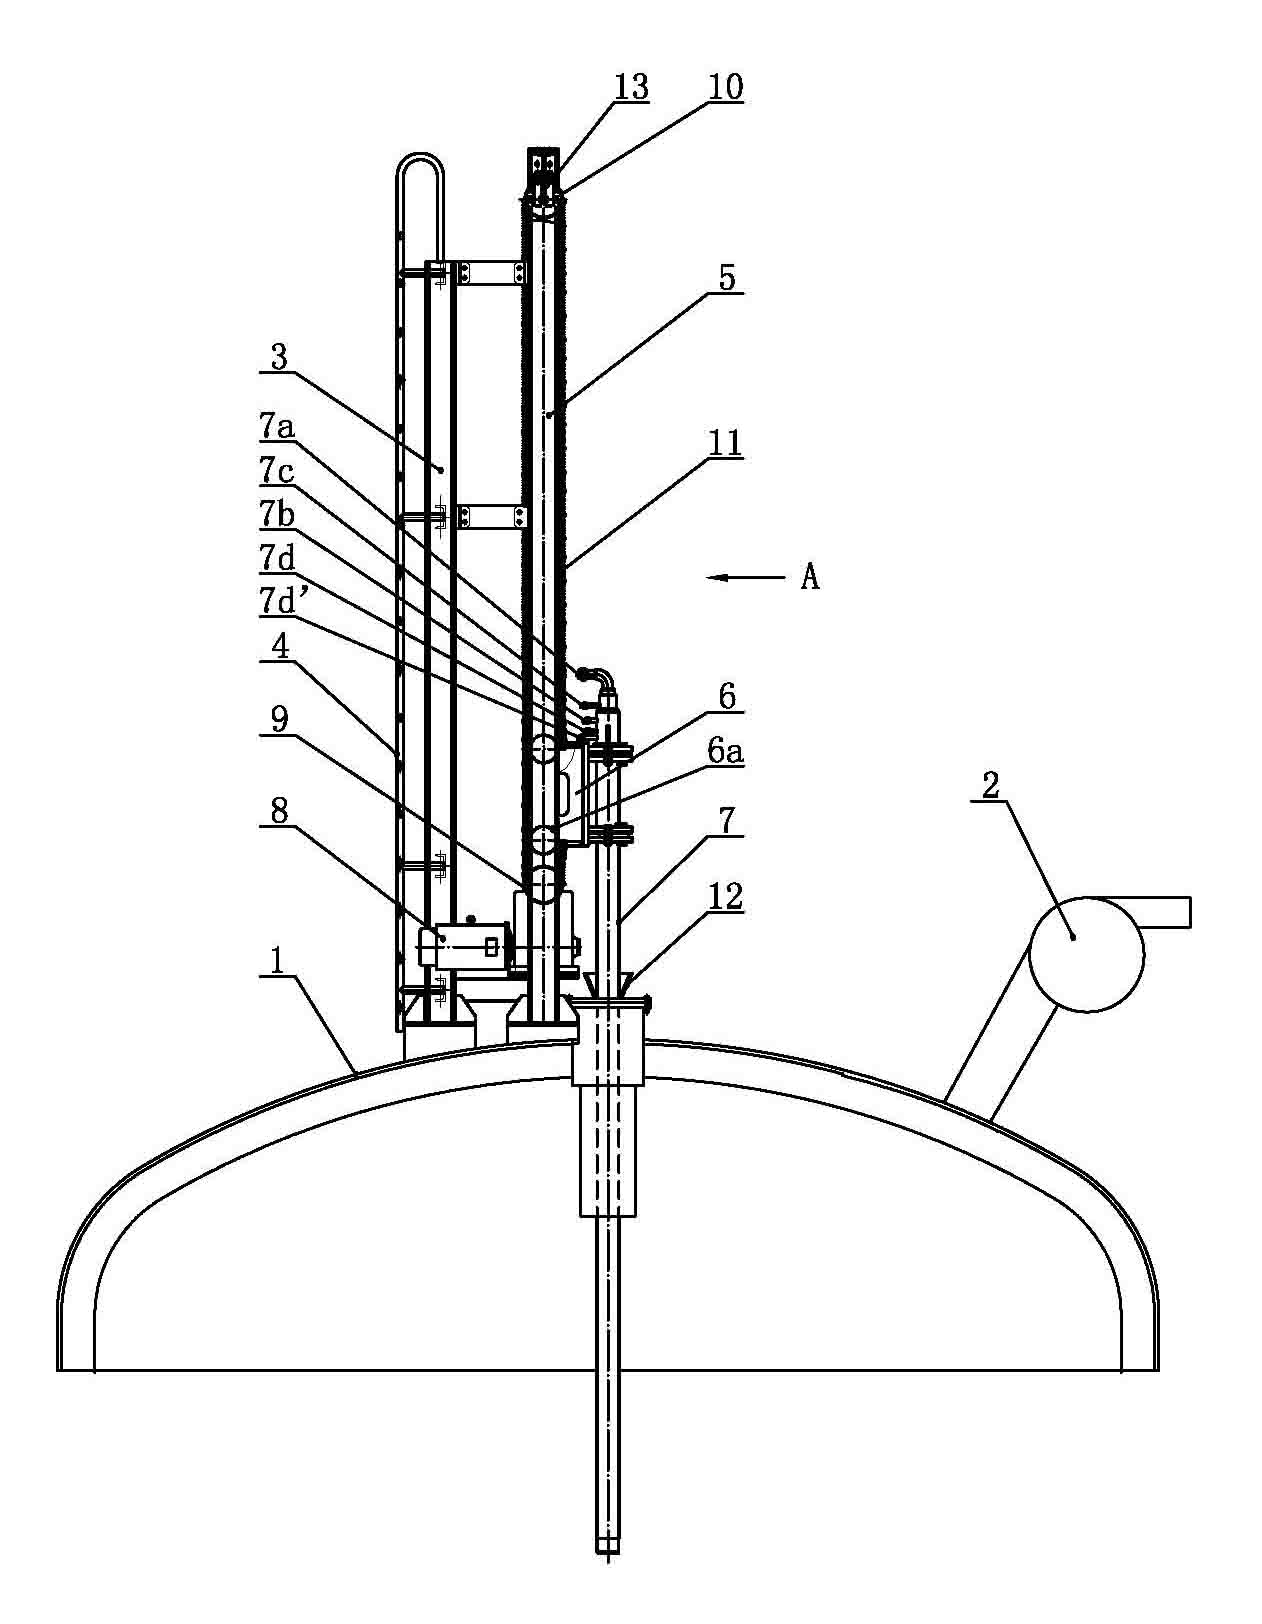 Top oxygen-blowing combustion system for intermediate frequency furnace